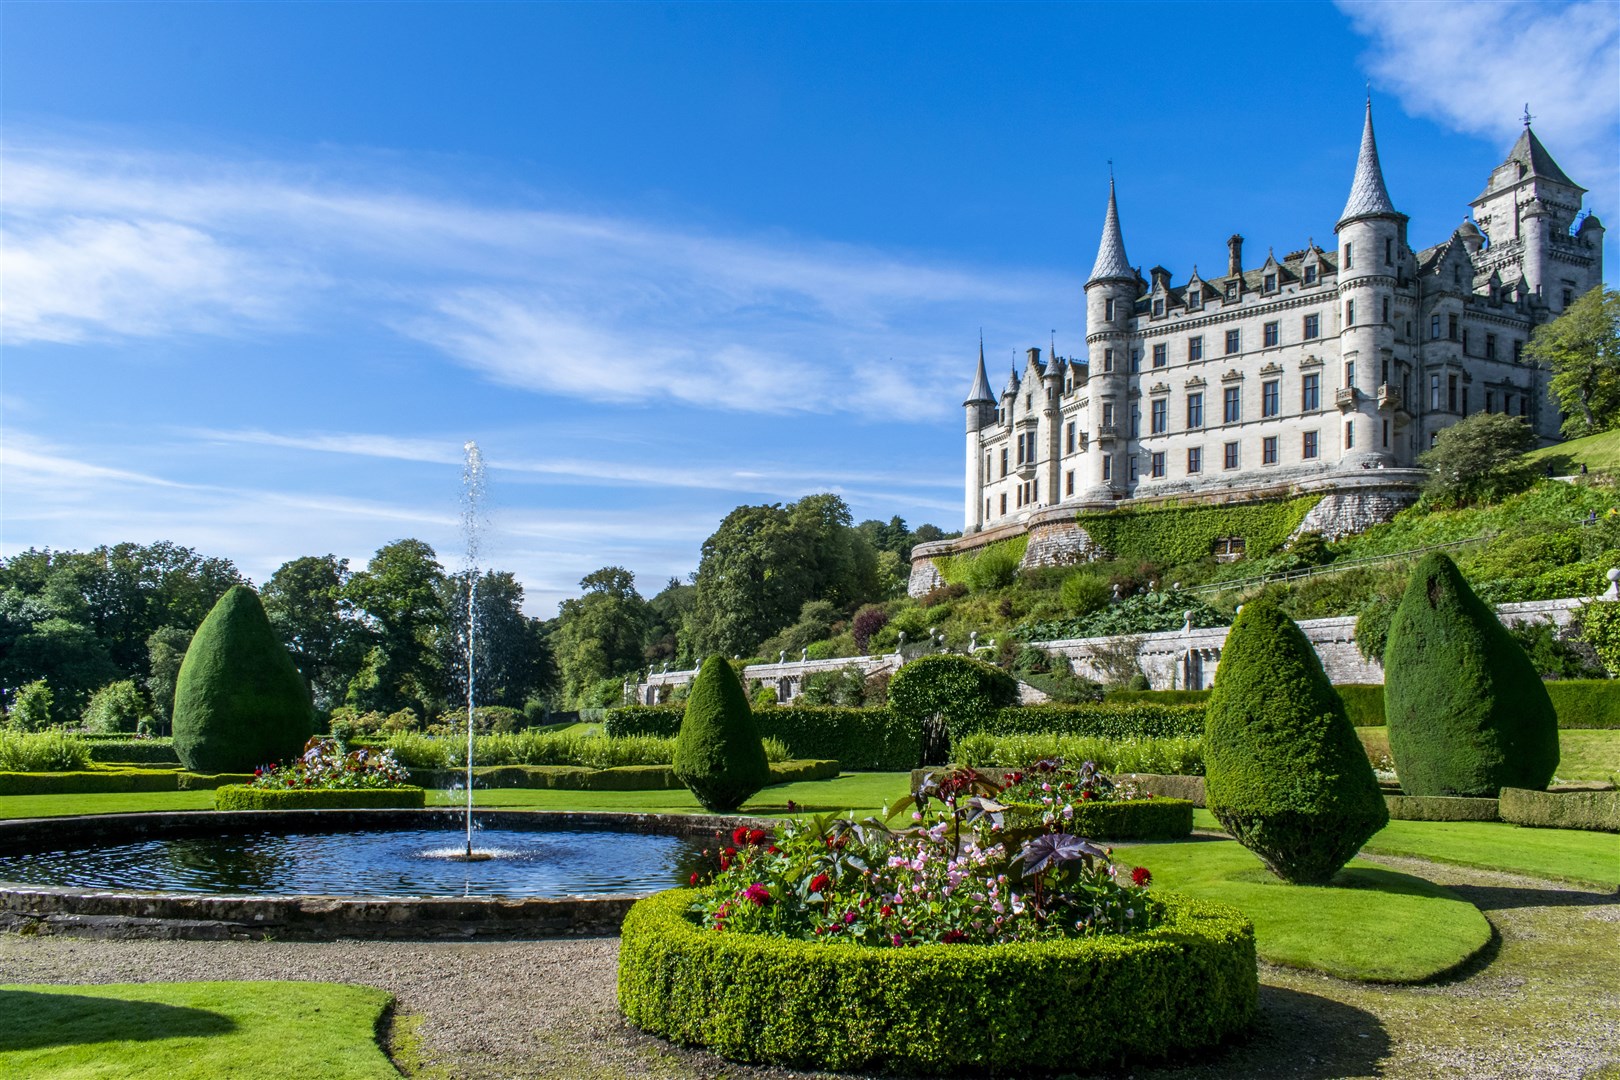 Dunrobin Castle – just one of the 286 attractions on the North Coast 500.